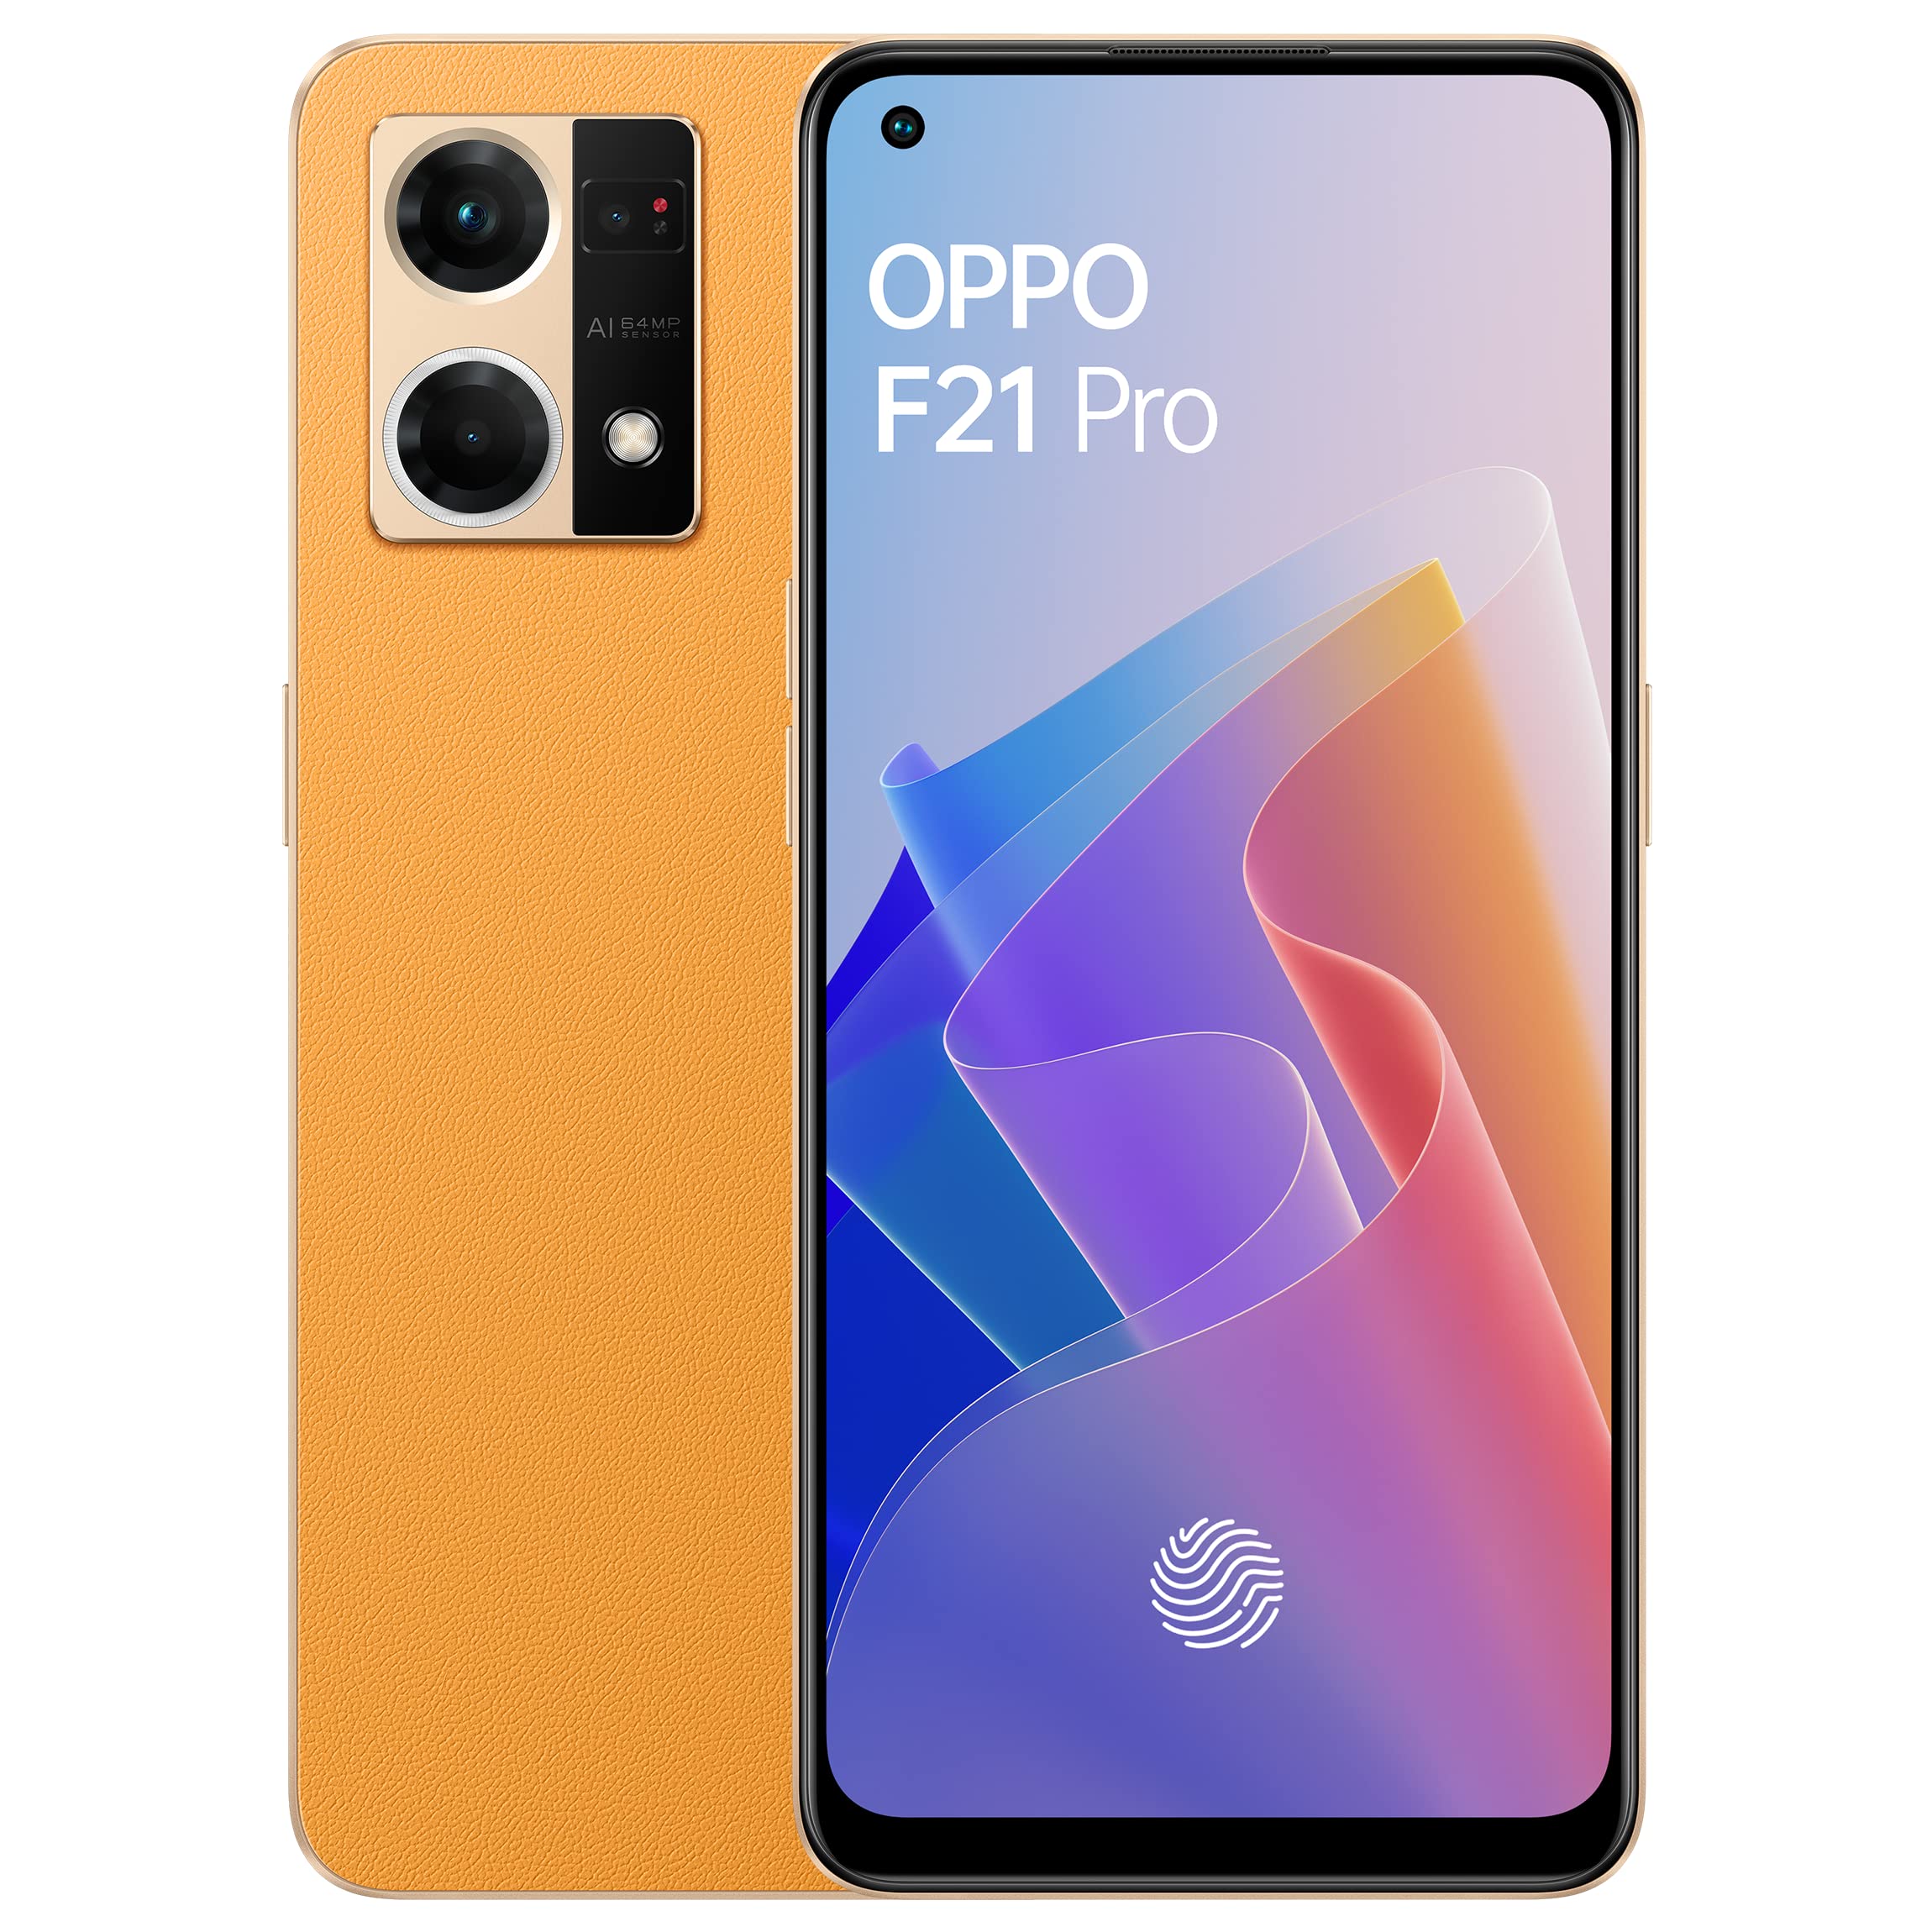 Oppo F21 Pro Specifications & Price in India